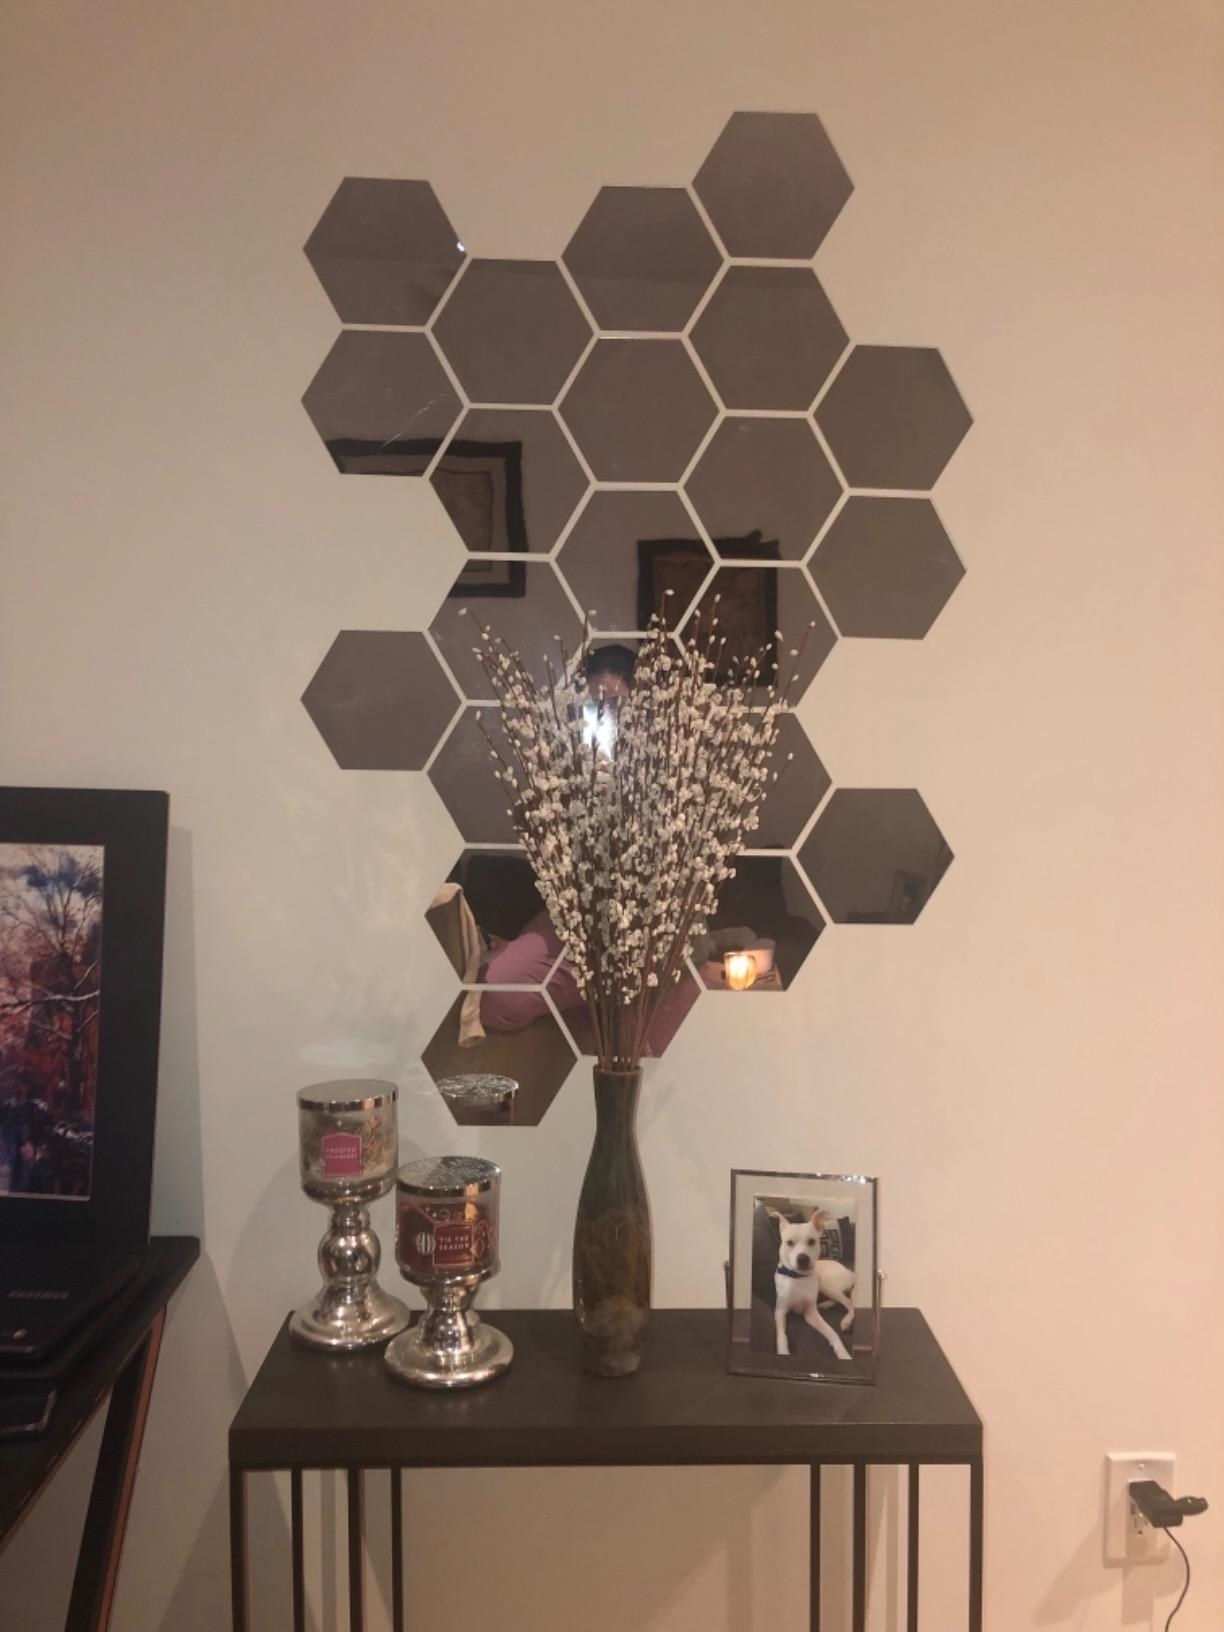 A reviewer&#x27;s set of hexagon-shaped mirrors on the wall